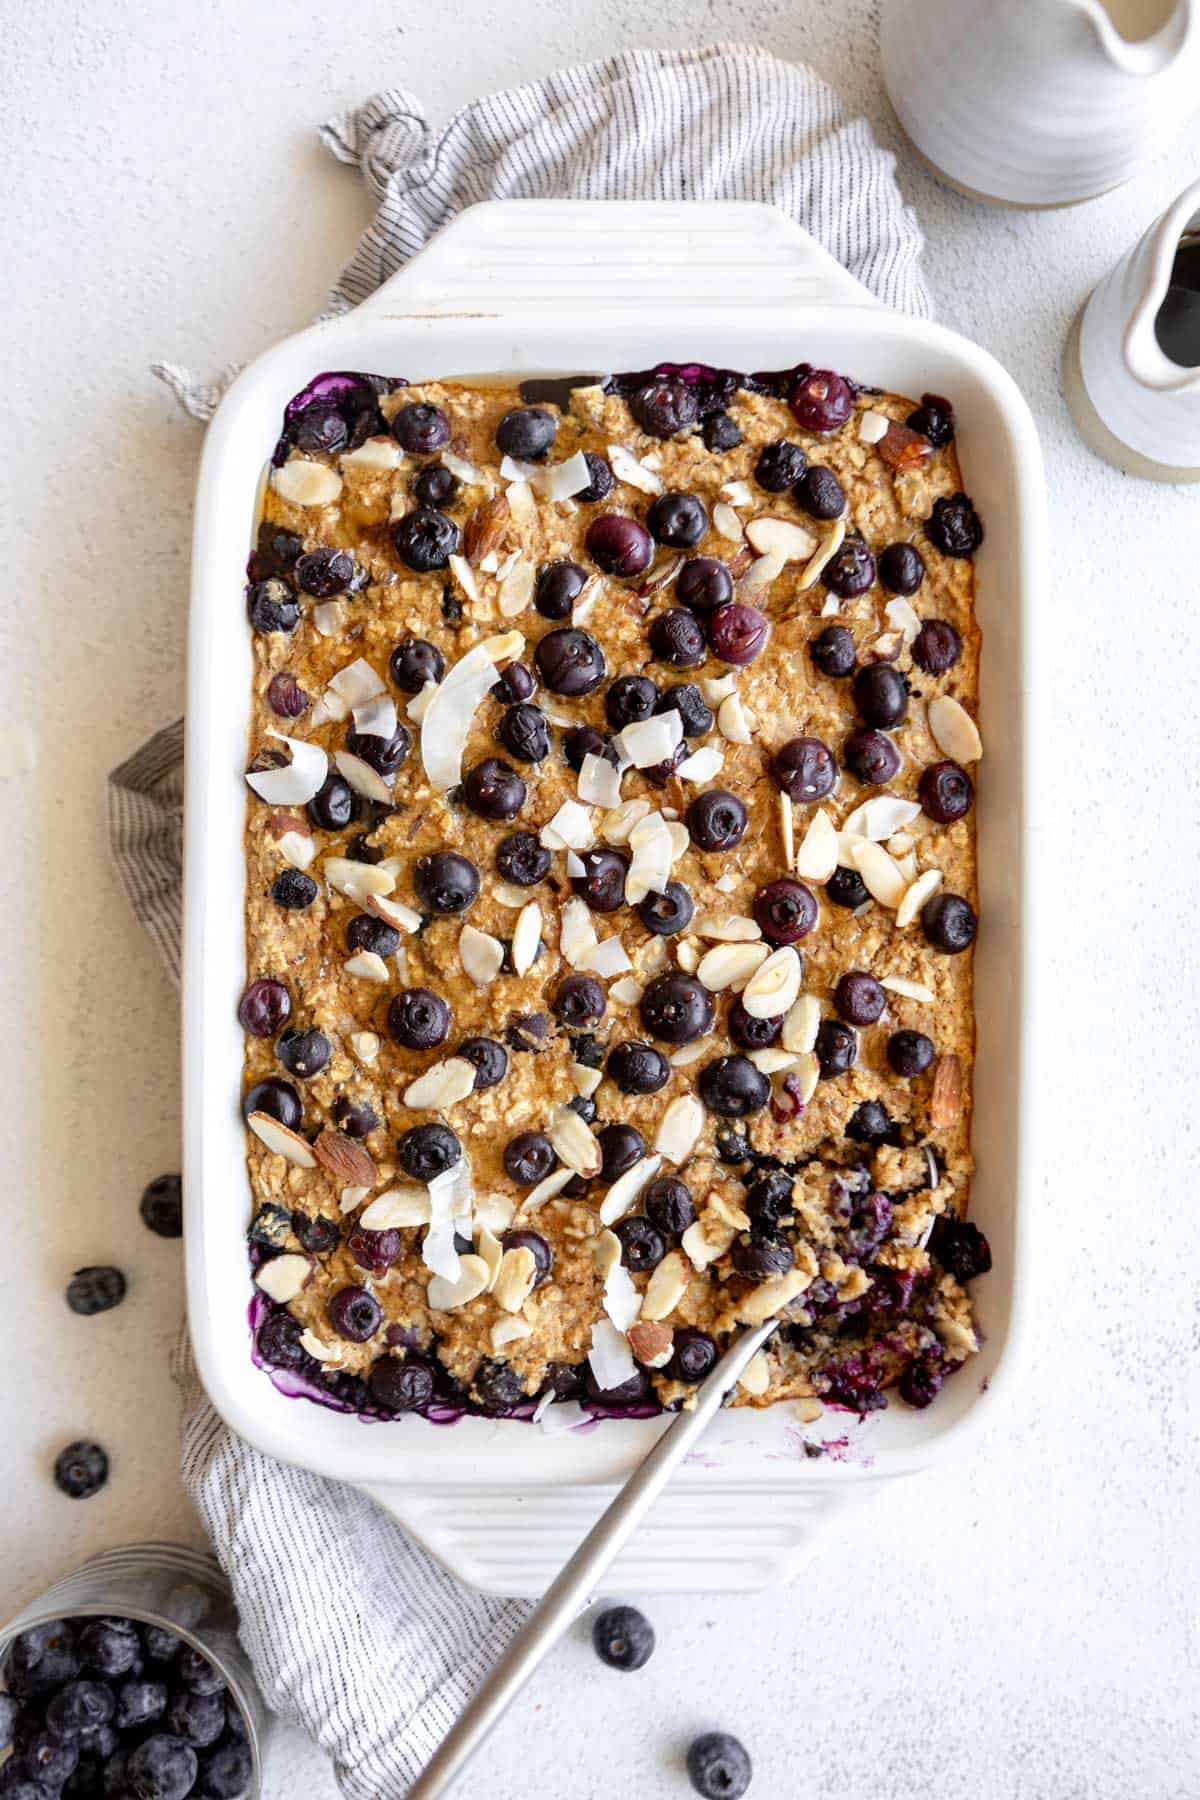 blueberry baked oatmeal in a baking dish with a spoon on the side